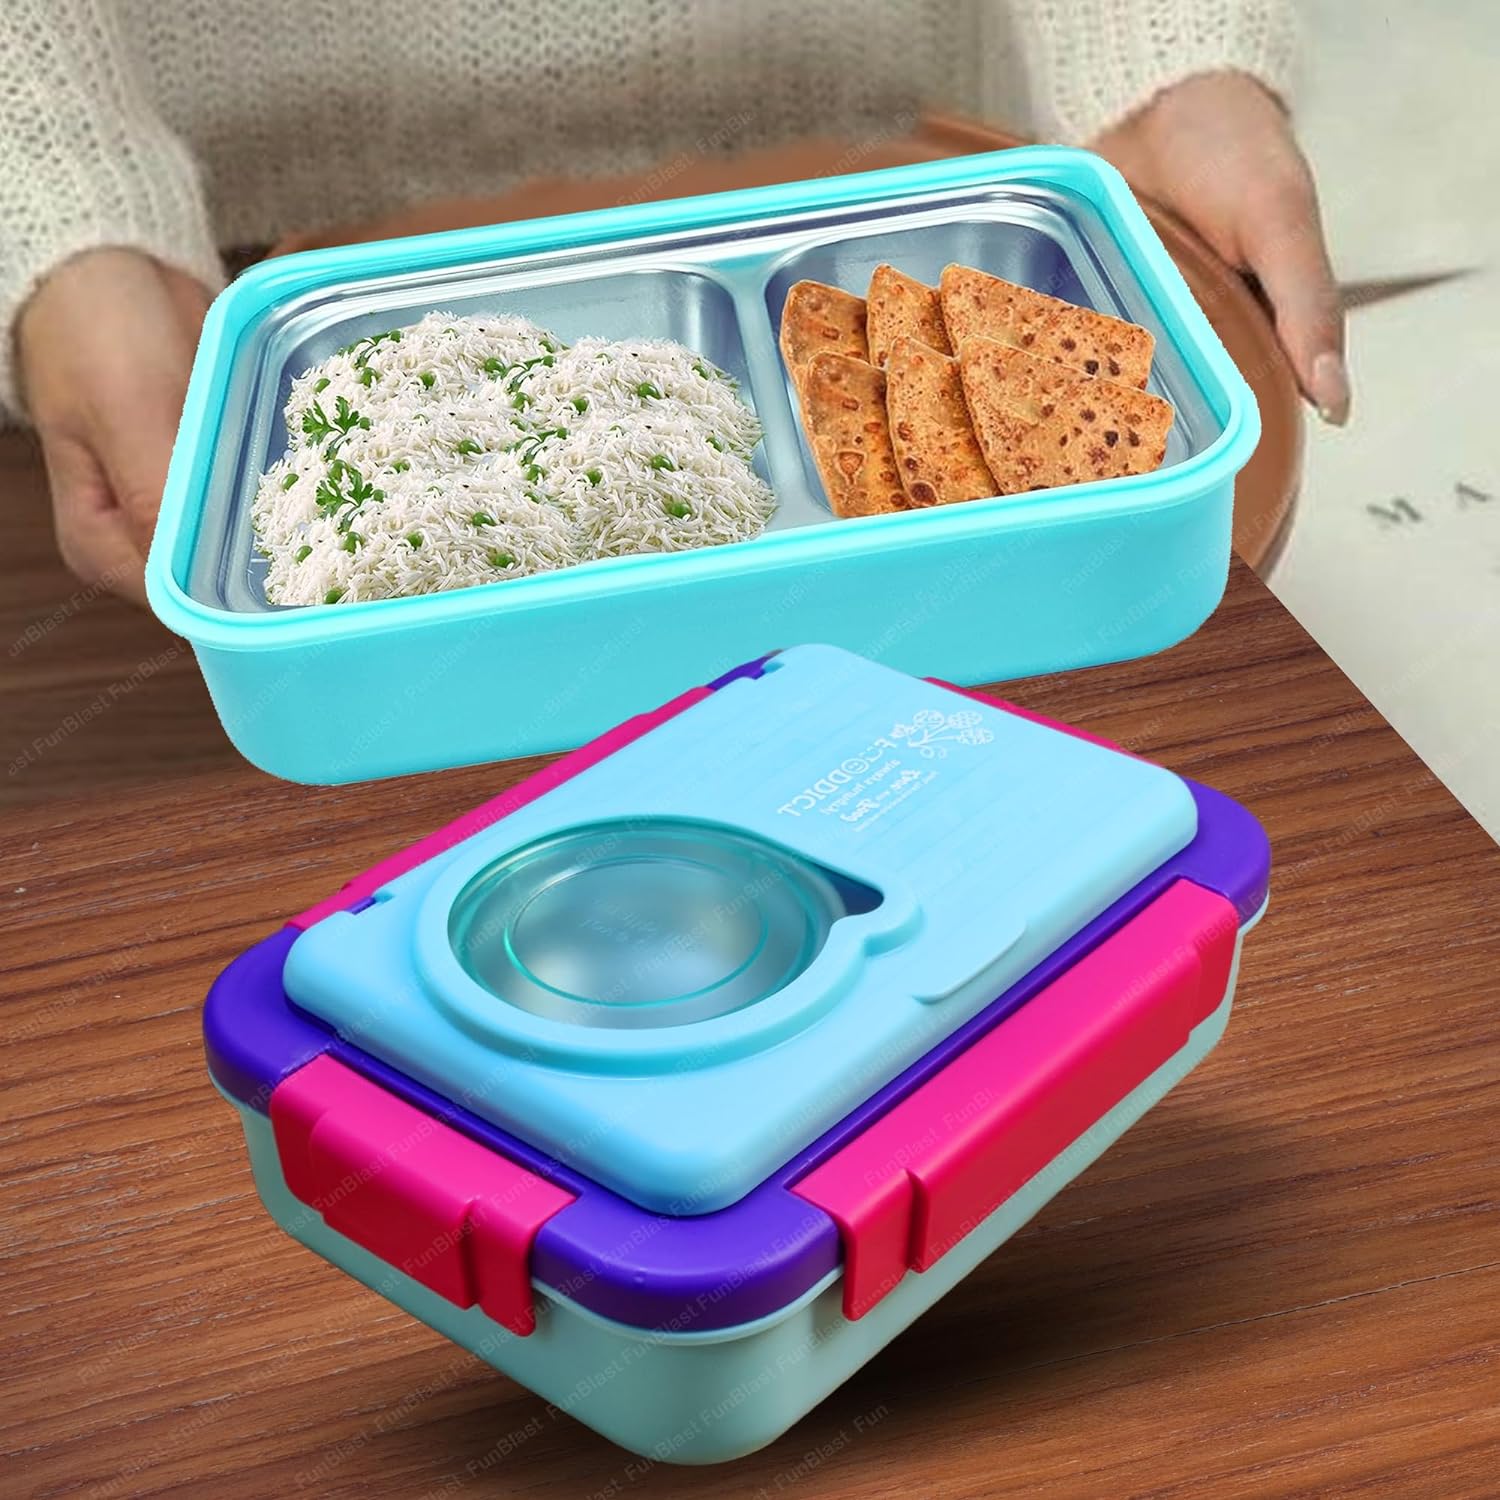 Lunch Box for Kids – Tiffin Box, Stainless Steel Lunch Box, Insulated Bento Lunch Box for Kids, 5 Compartment Lunch Box with Bowl, Spoon, Fork & Chopstick (Blue)